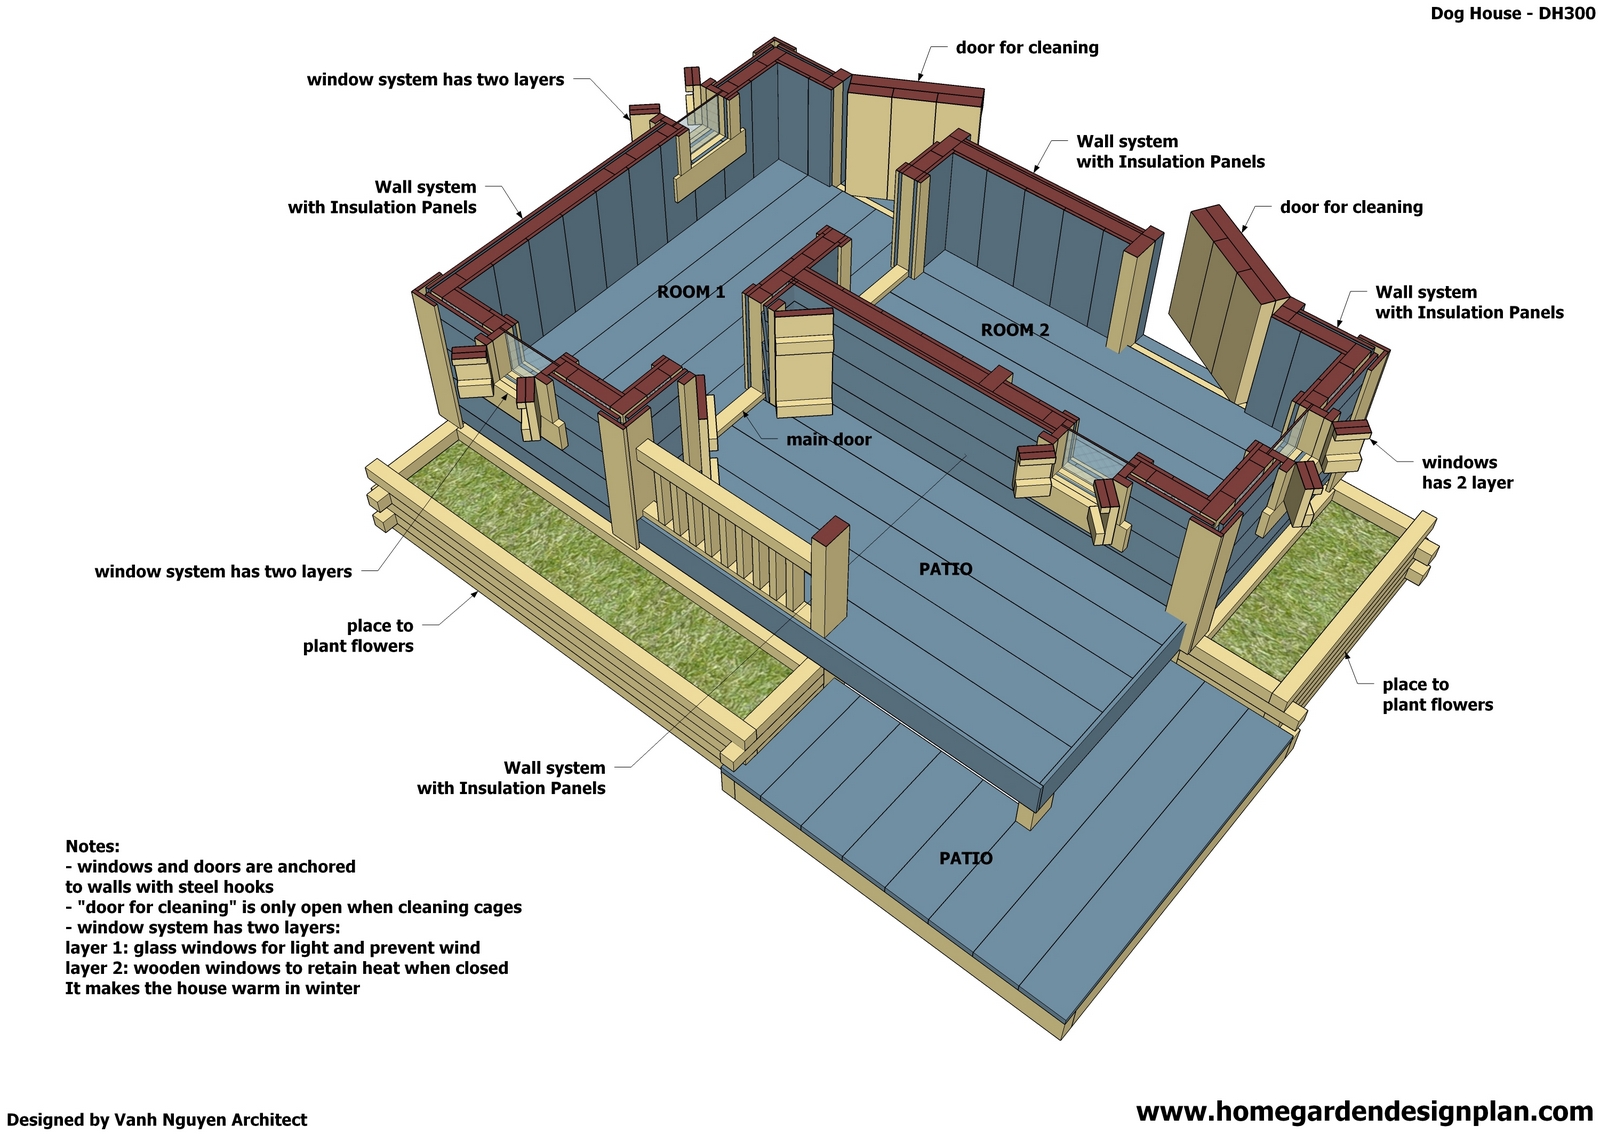 Woodworking 2 dog house plans free PDF Free Download